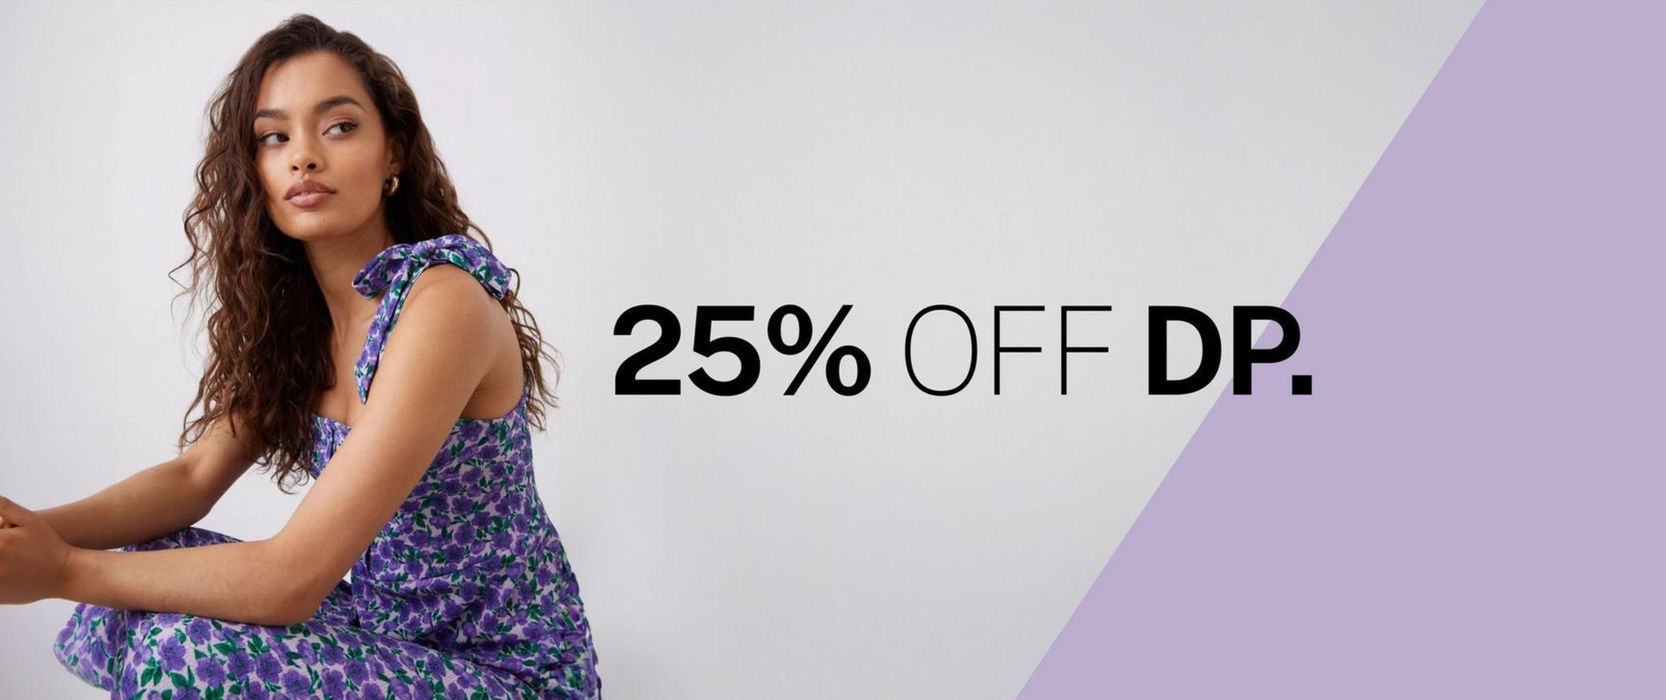 Dorothy Perkins catalogue in Alnwick | 40% Off Spring Outfits | 13/05/2024 - 26/05/2024